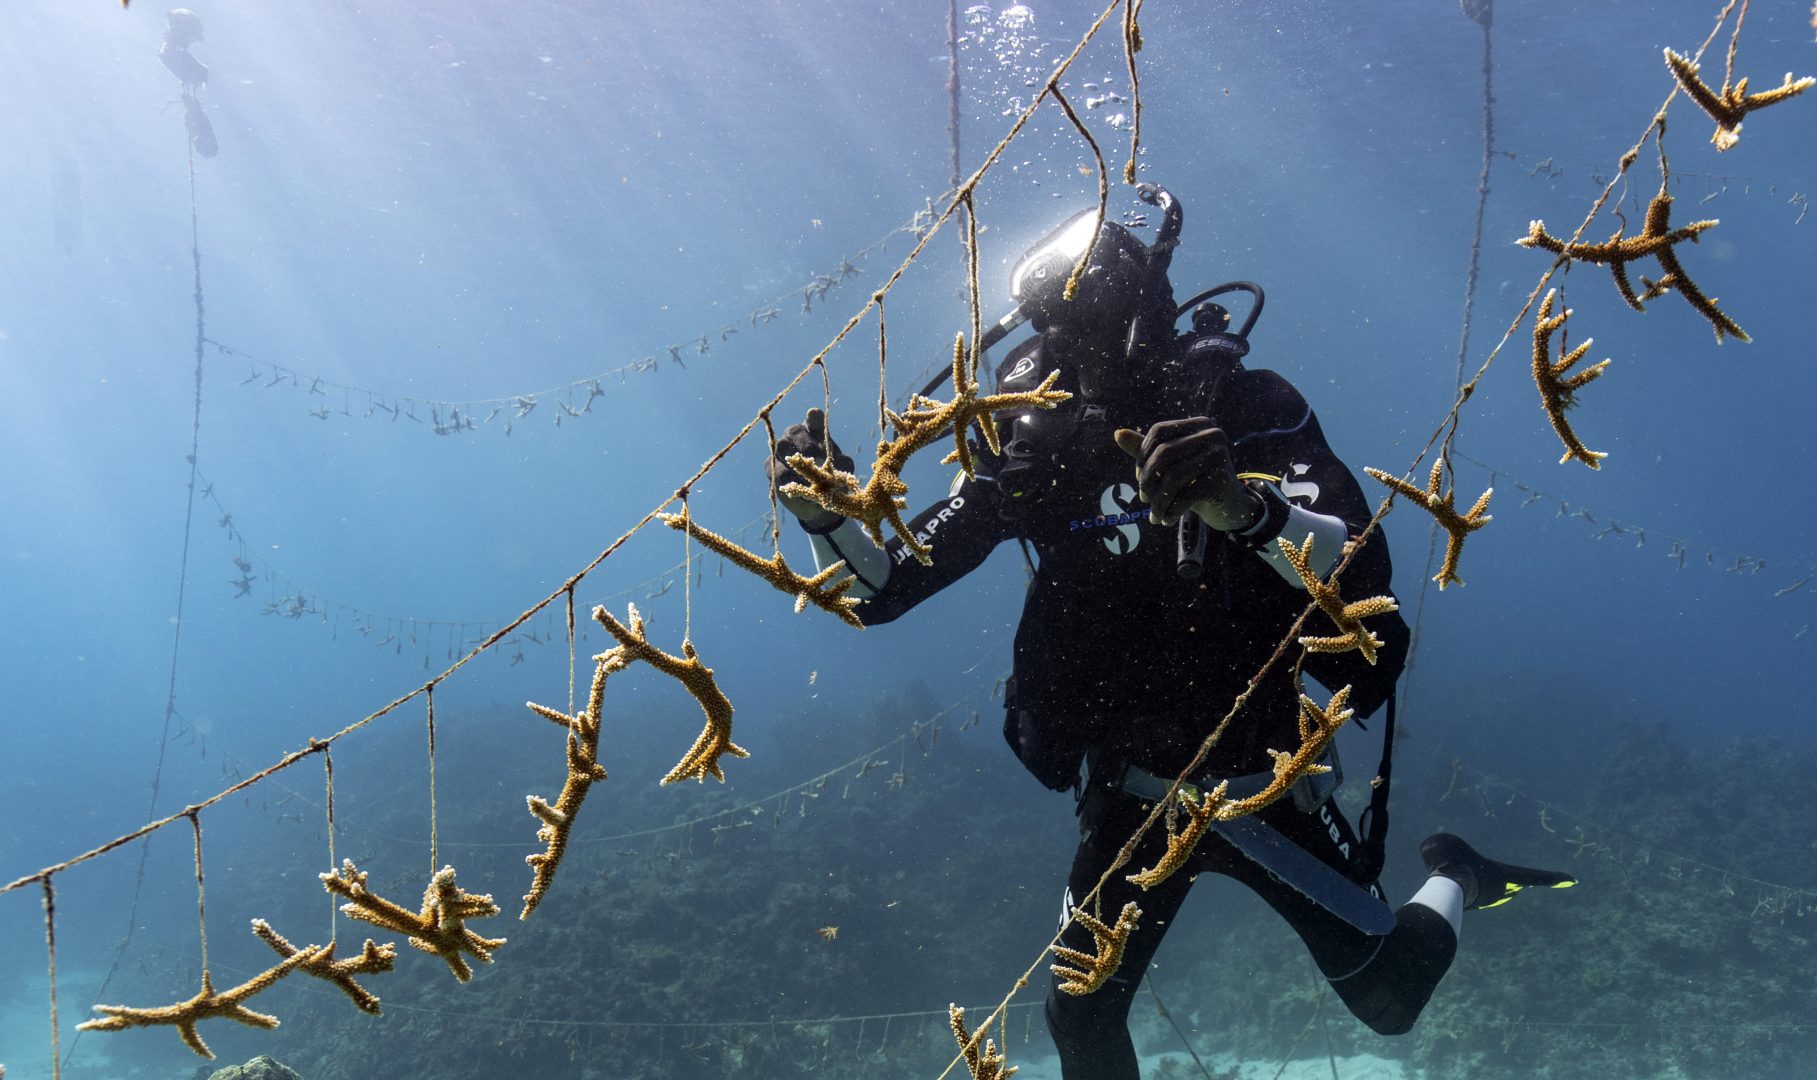 Diver Lenford DaCosta cleans up lines of staghorn coral at a nursery inside the Oracabessa Fish Sanctuary Tuesday, Feb. 12, 2019, in Oracabessa, Jamaica. After a series of natural and man-made disasters in the 1980s and 1990s, Jamaica lost 85 percent of its once-bountiful coral reefs. But today, the corals and tropical fish are slowly reappearing, thanks in part to a series of careful interventions.